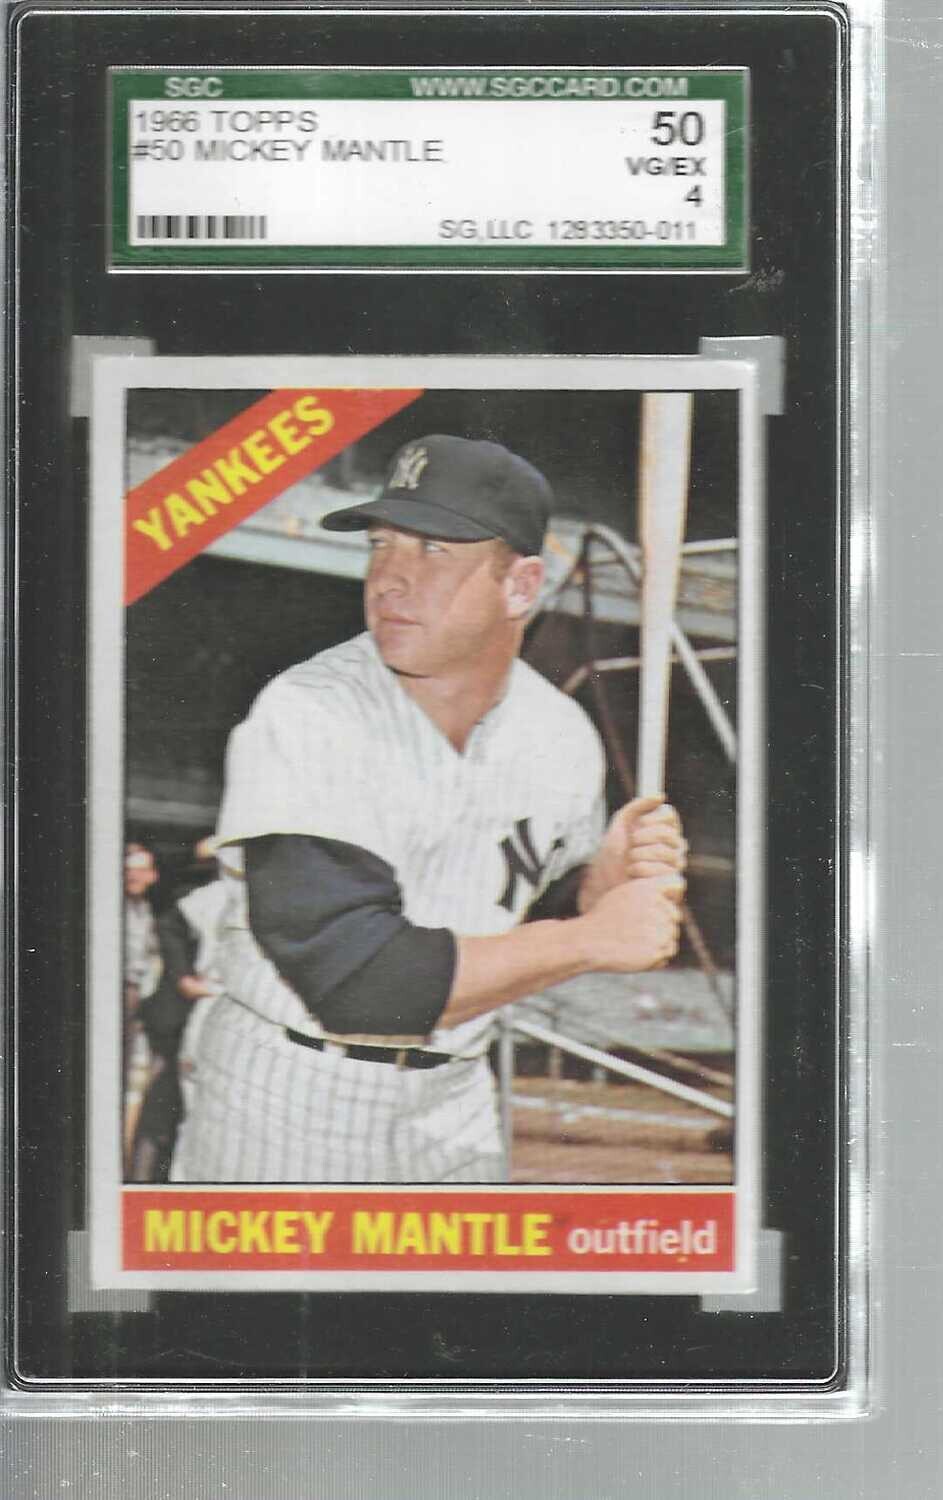 1957 Topps #50 MIckey Mantle SGC 4